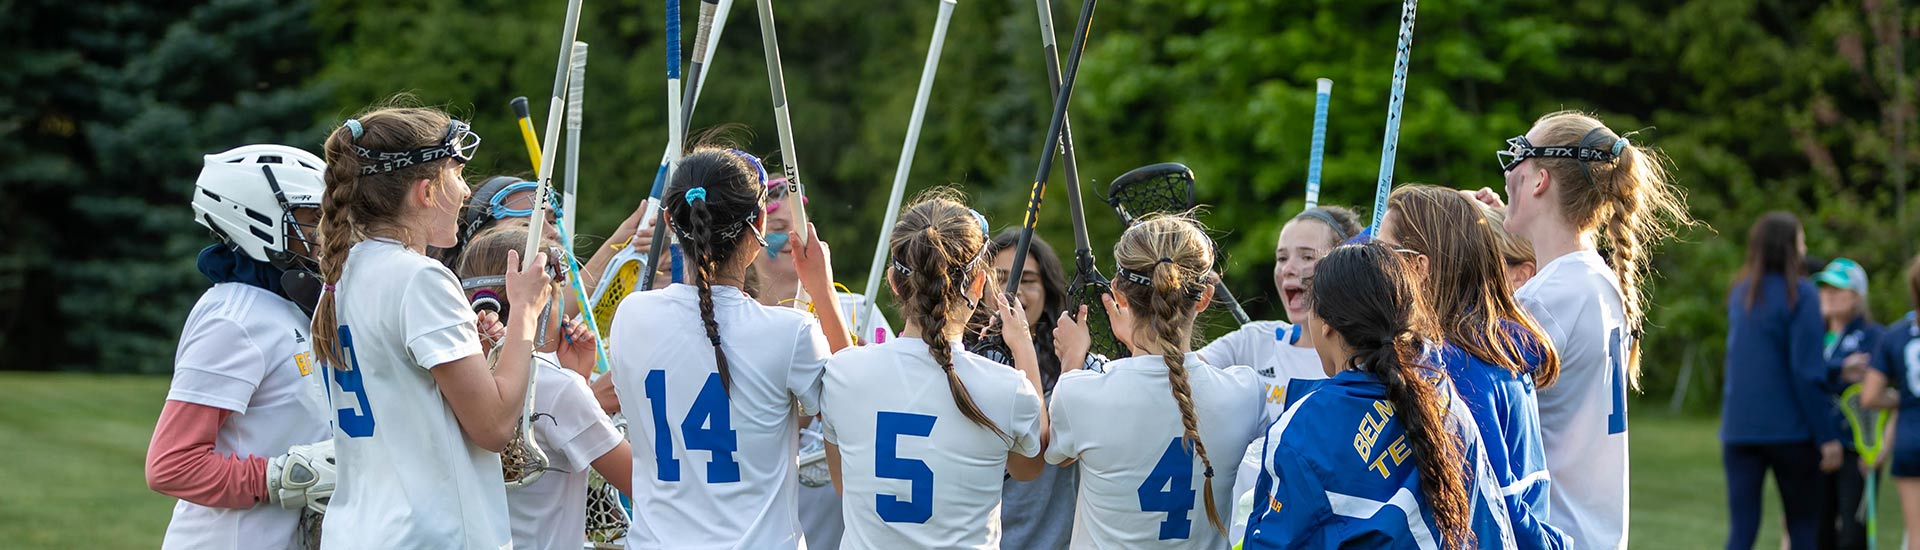 The field hockey team huddle with sticks up